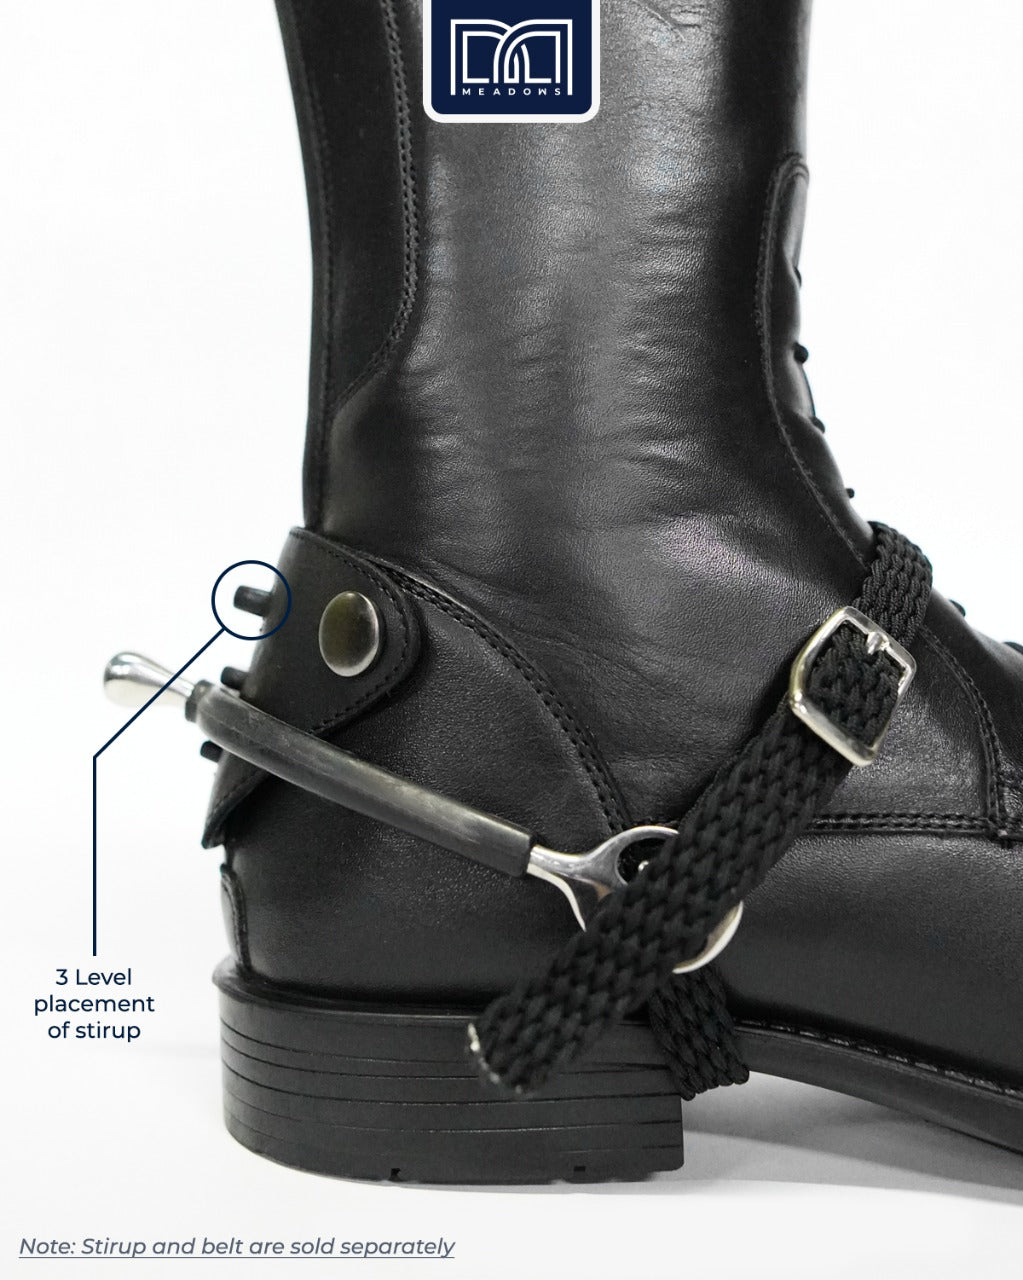 The Royal - Long Riding Boots